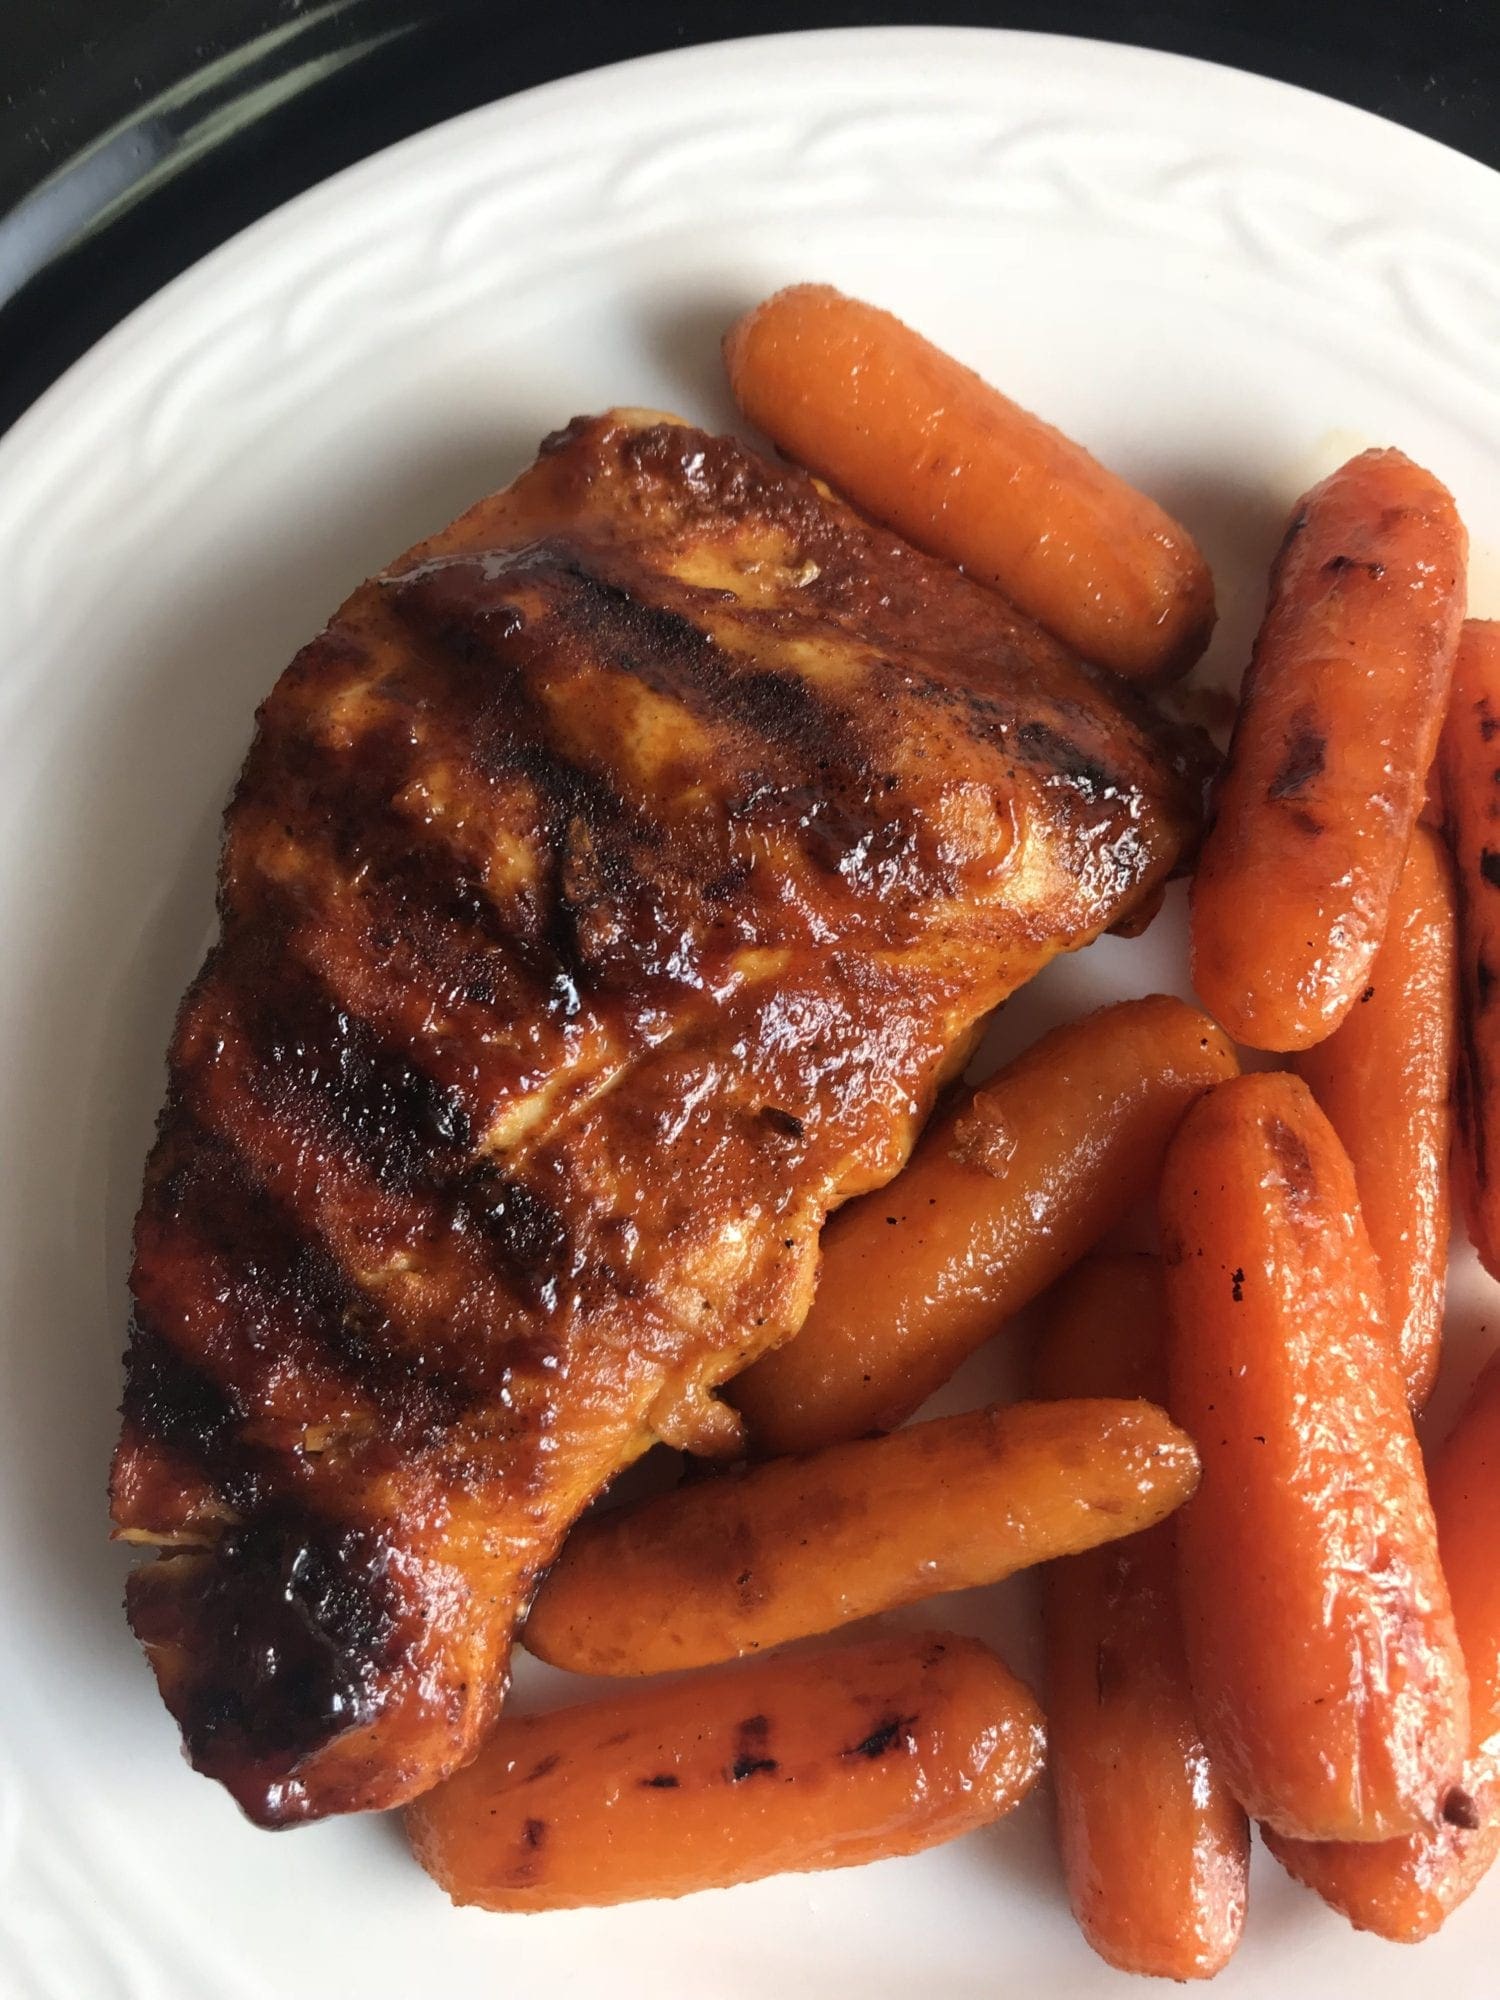 Maple glazed chicken and maple glazed carrots